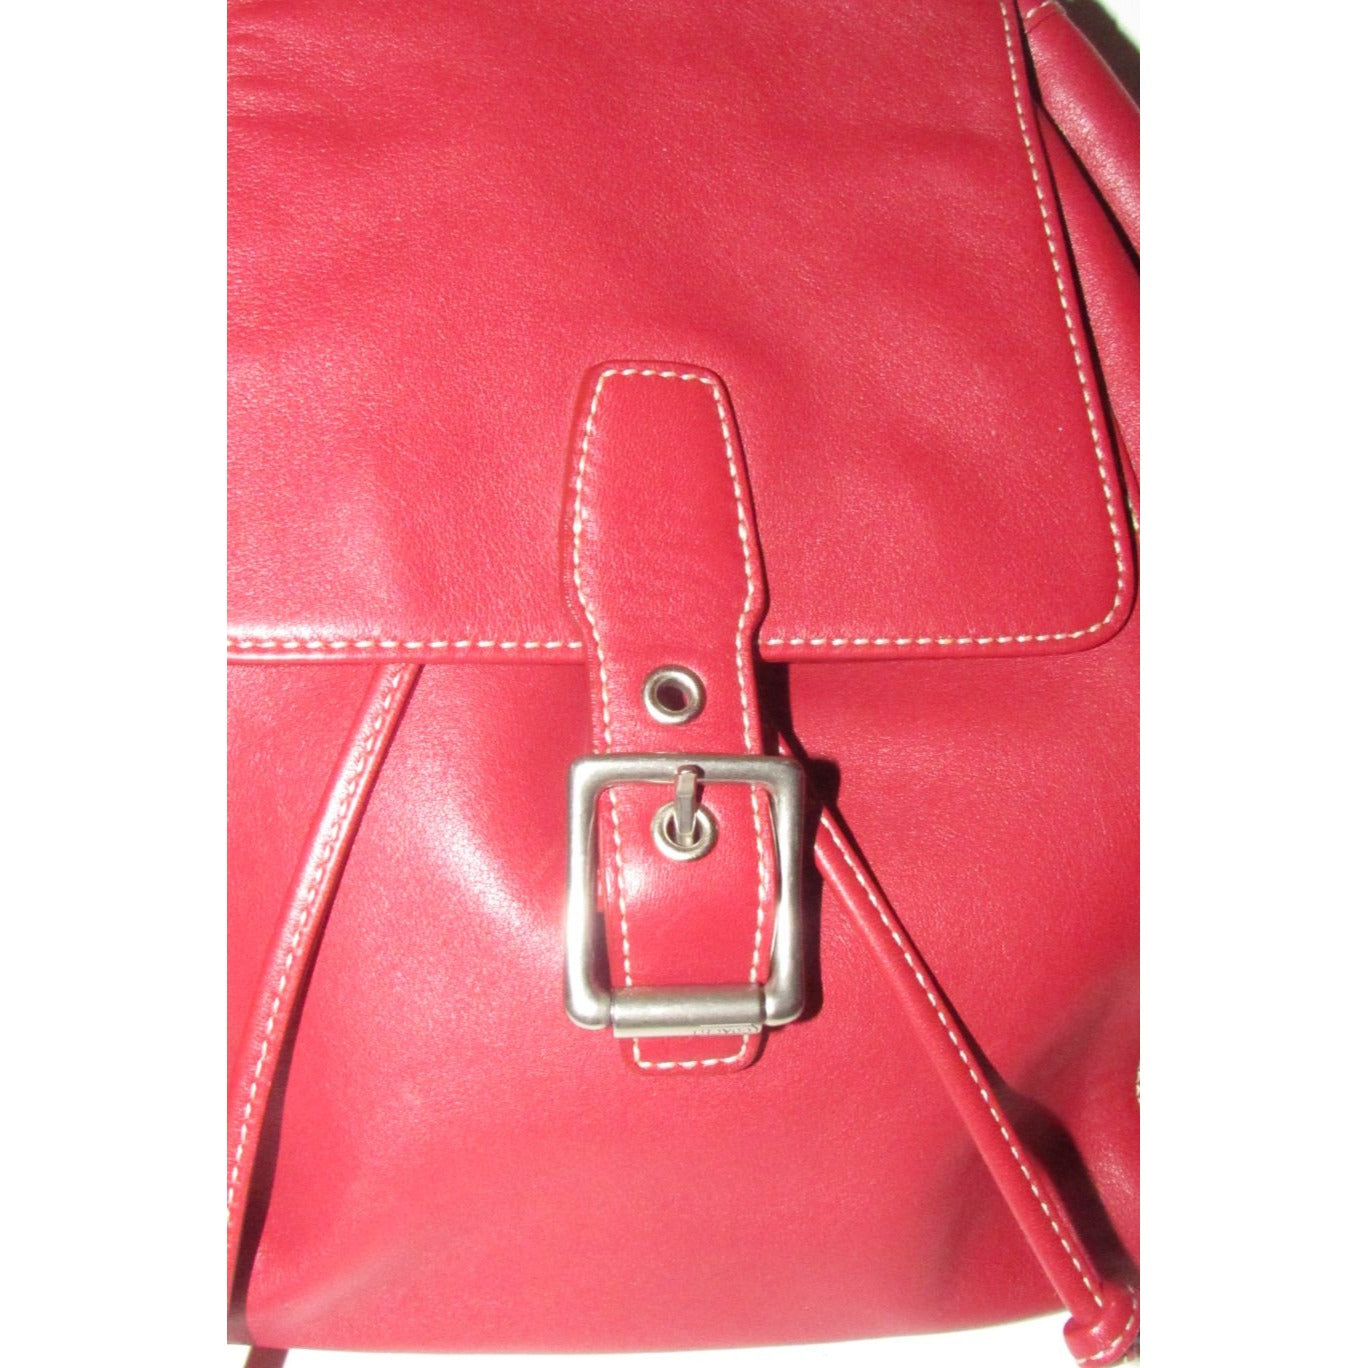 Coach, 'Legacy', large, sling style shoulder bag or backpack in buttery soft red leather with chrome accents and its Coach hangtag